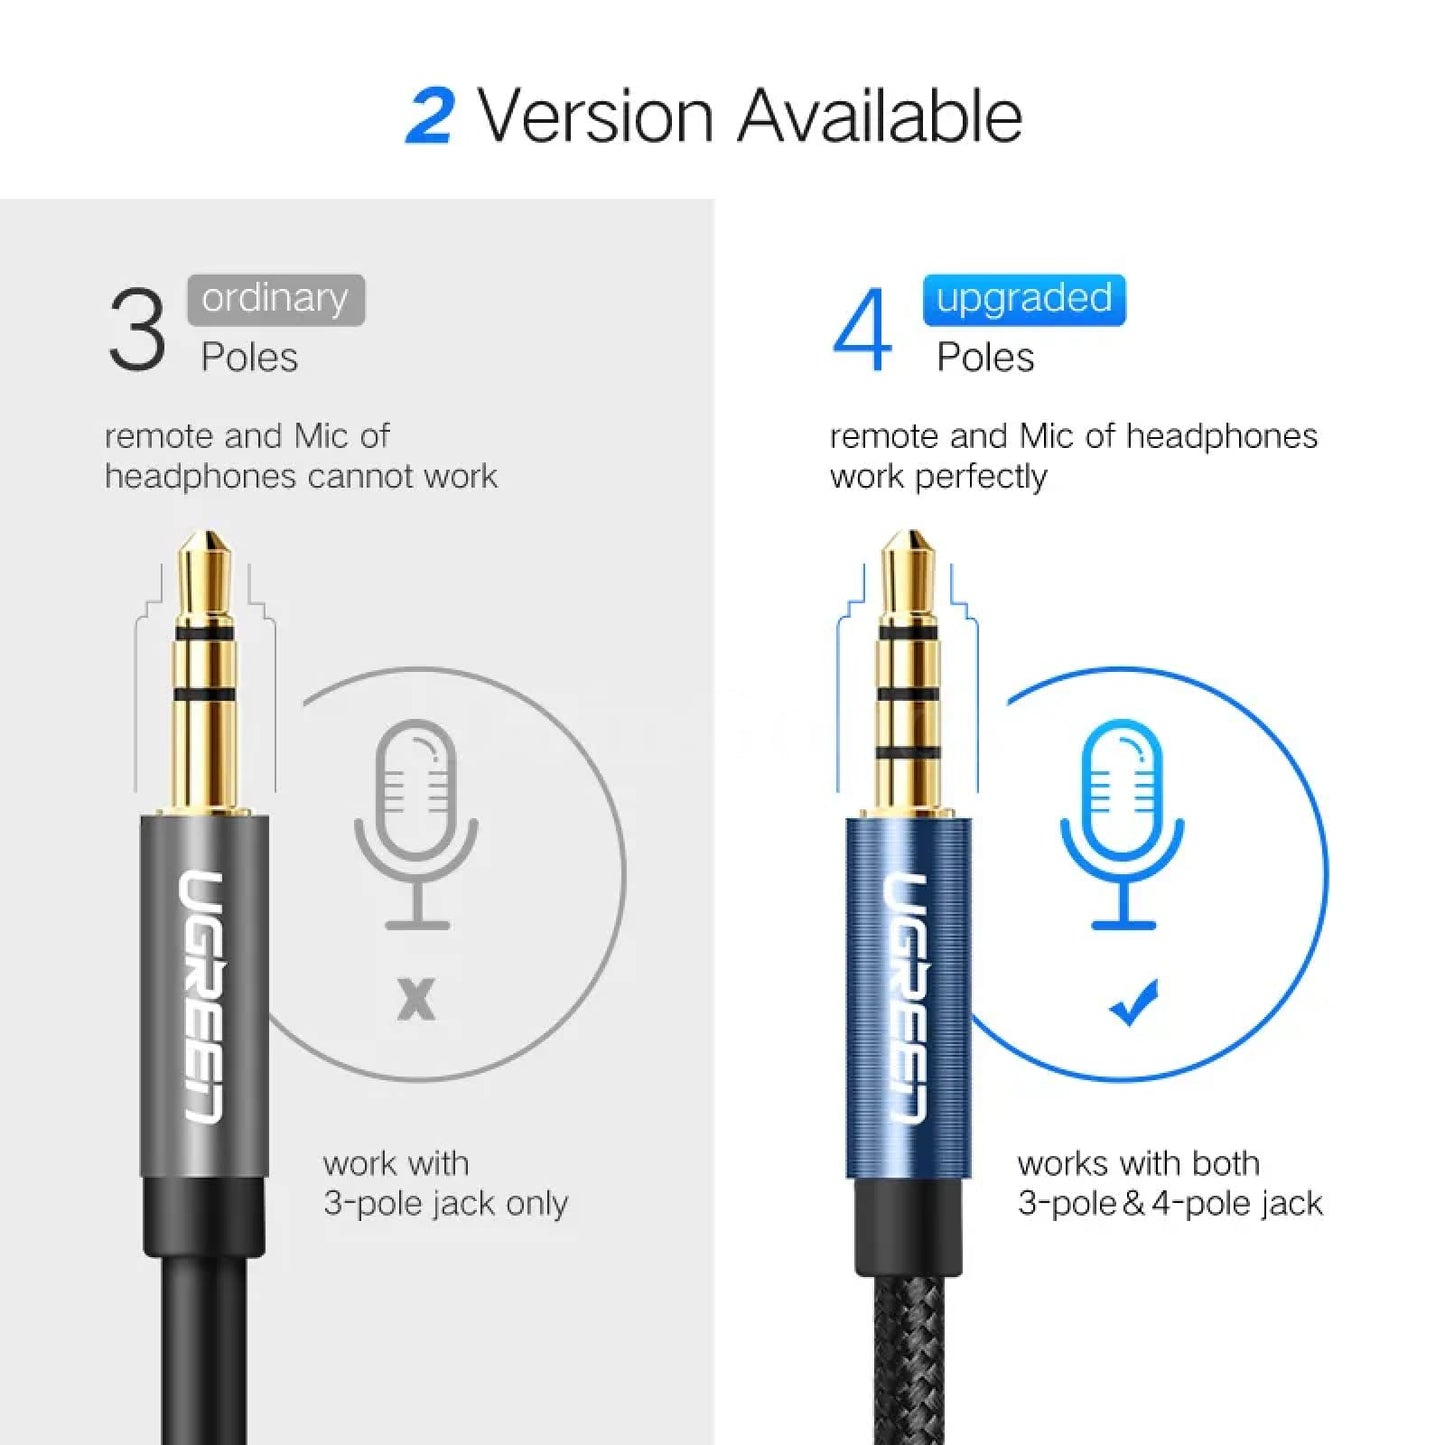 Ugreen 3.5Mm Audio Extension Cable - Stereo Aux Jack For Huawei P20 Lite Xiaomi Redmi 5 Plus Pc